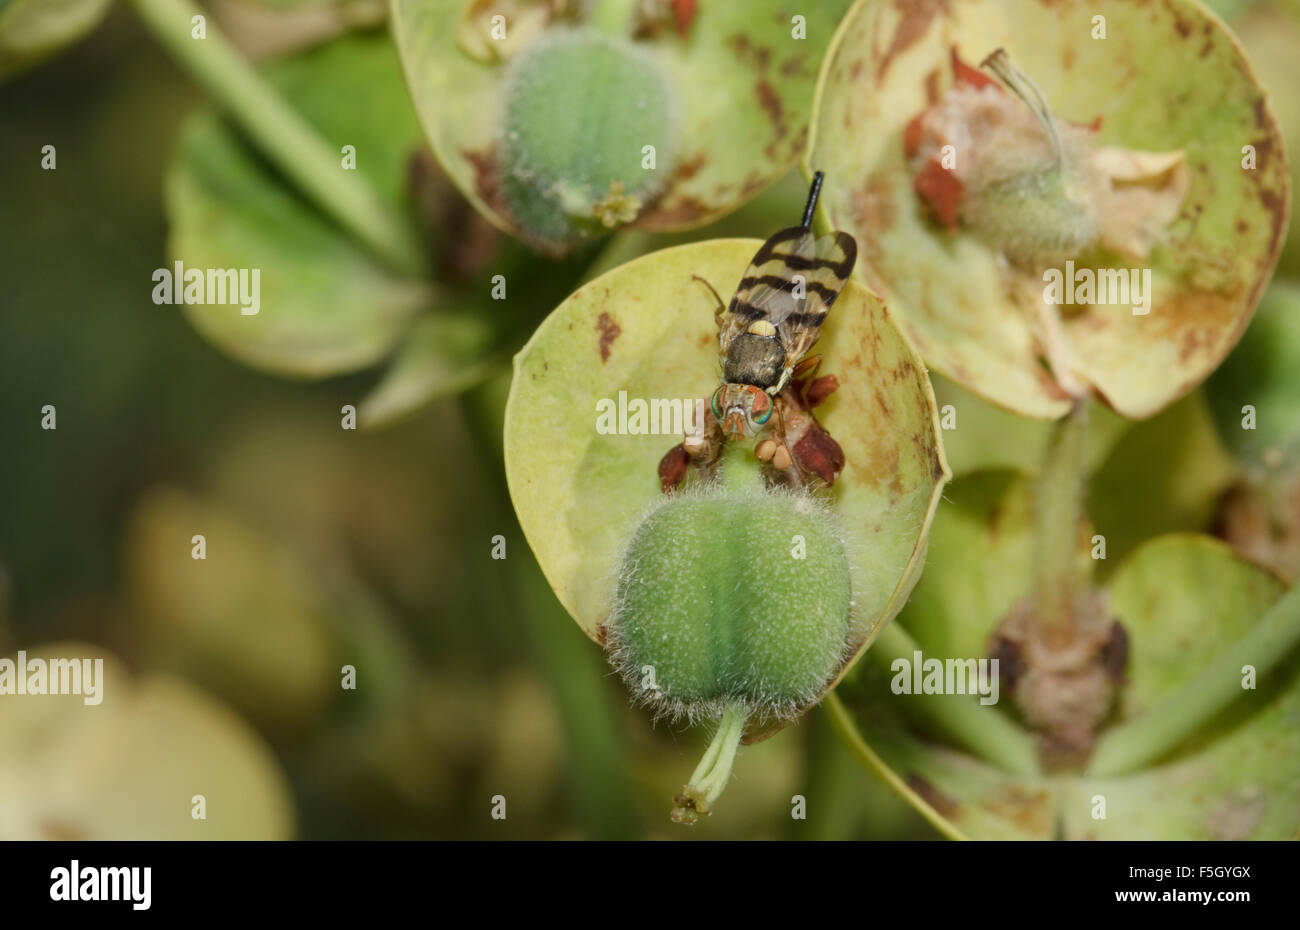 Macro of a fruit fly resting on a plant. Lemnos island, Greece Stock Photo